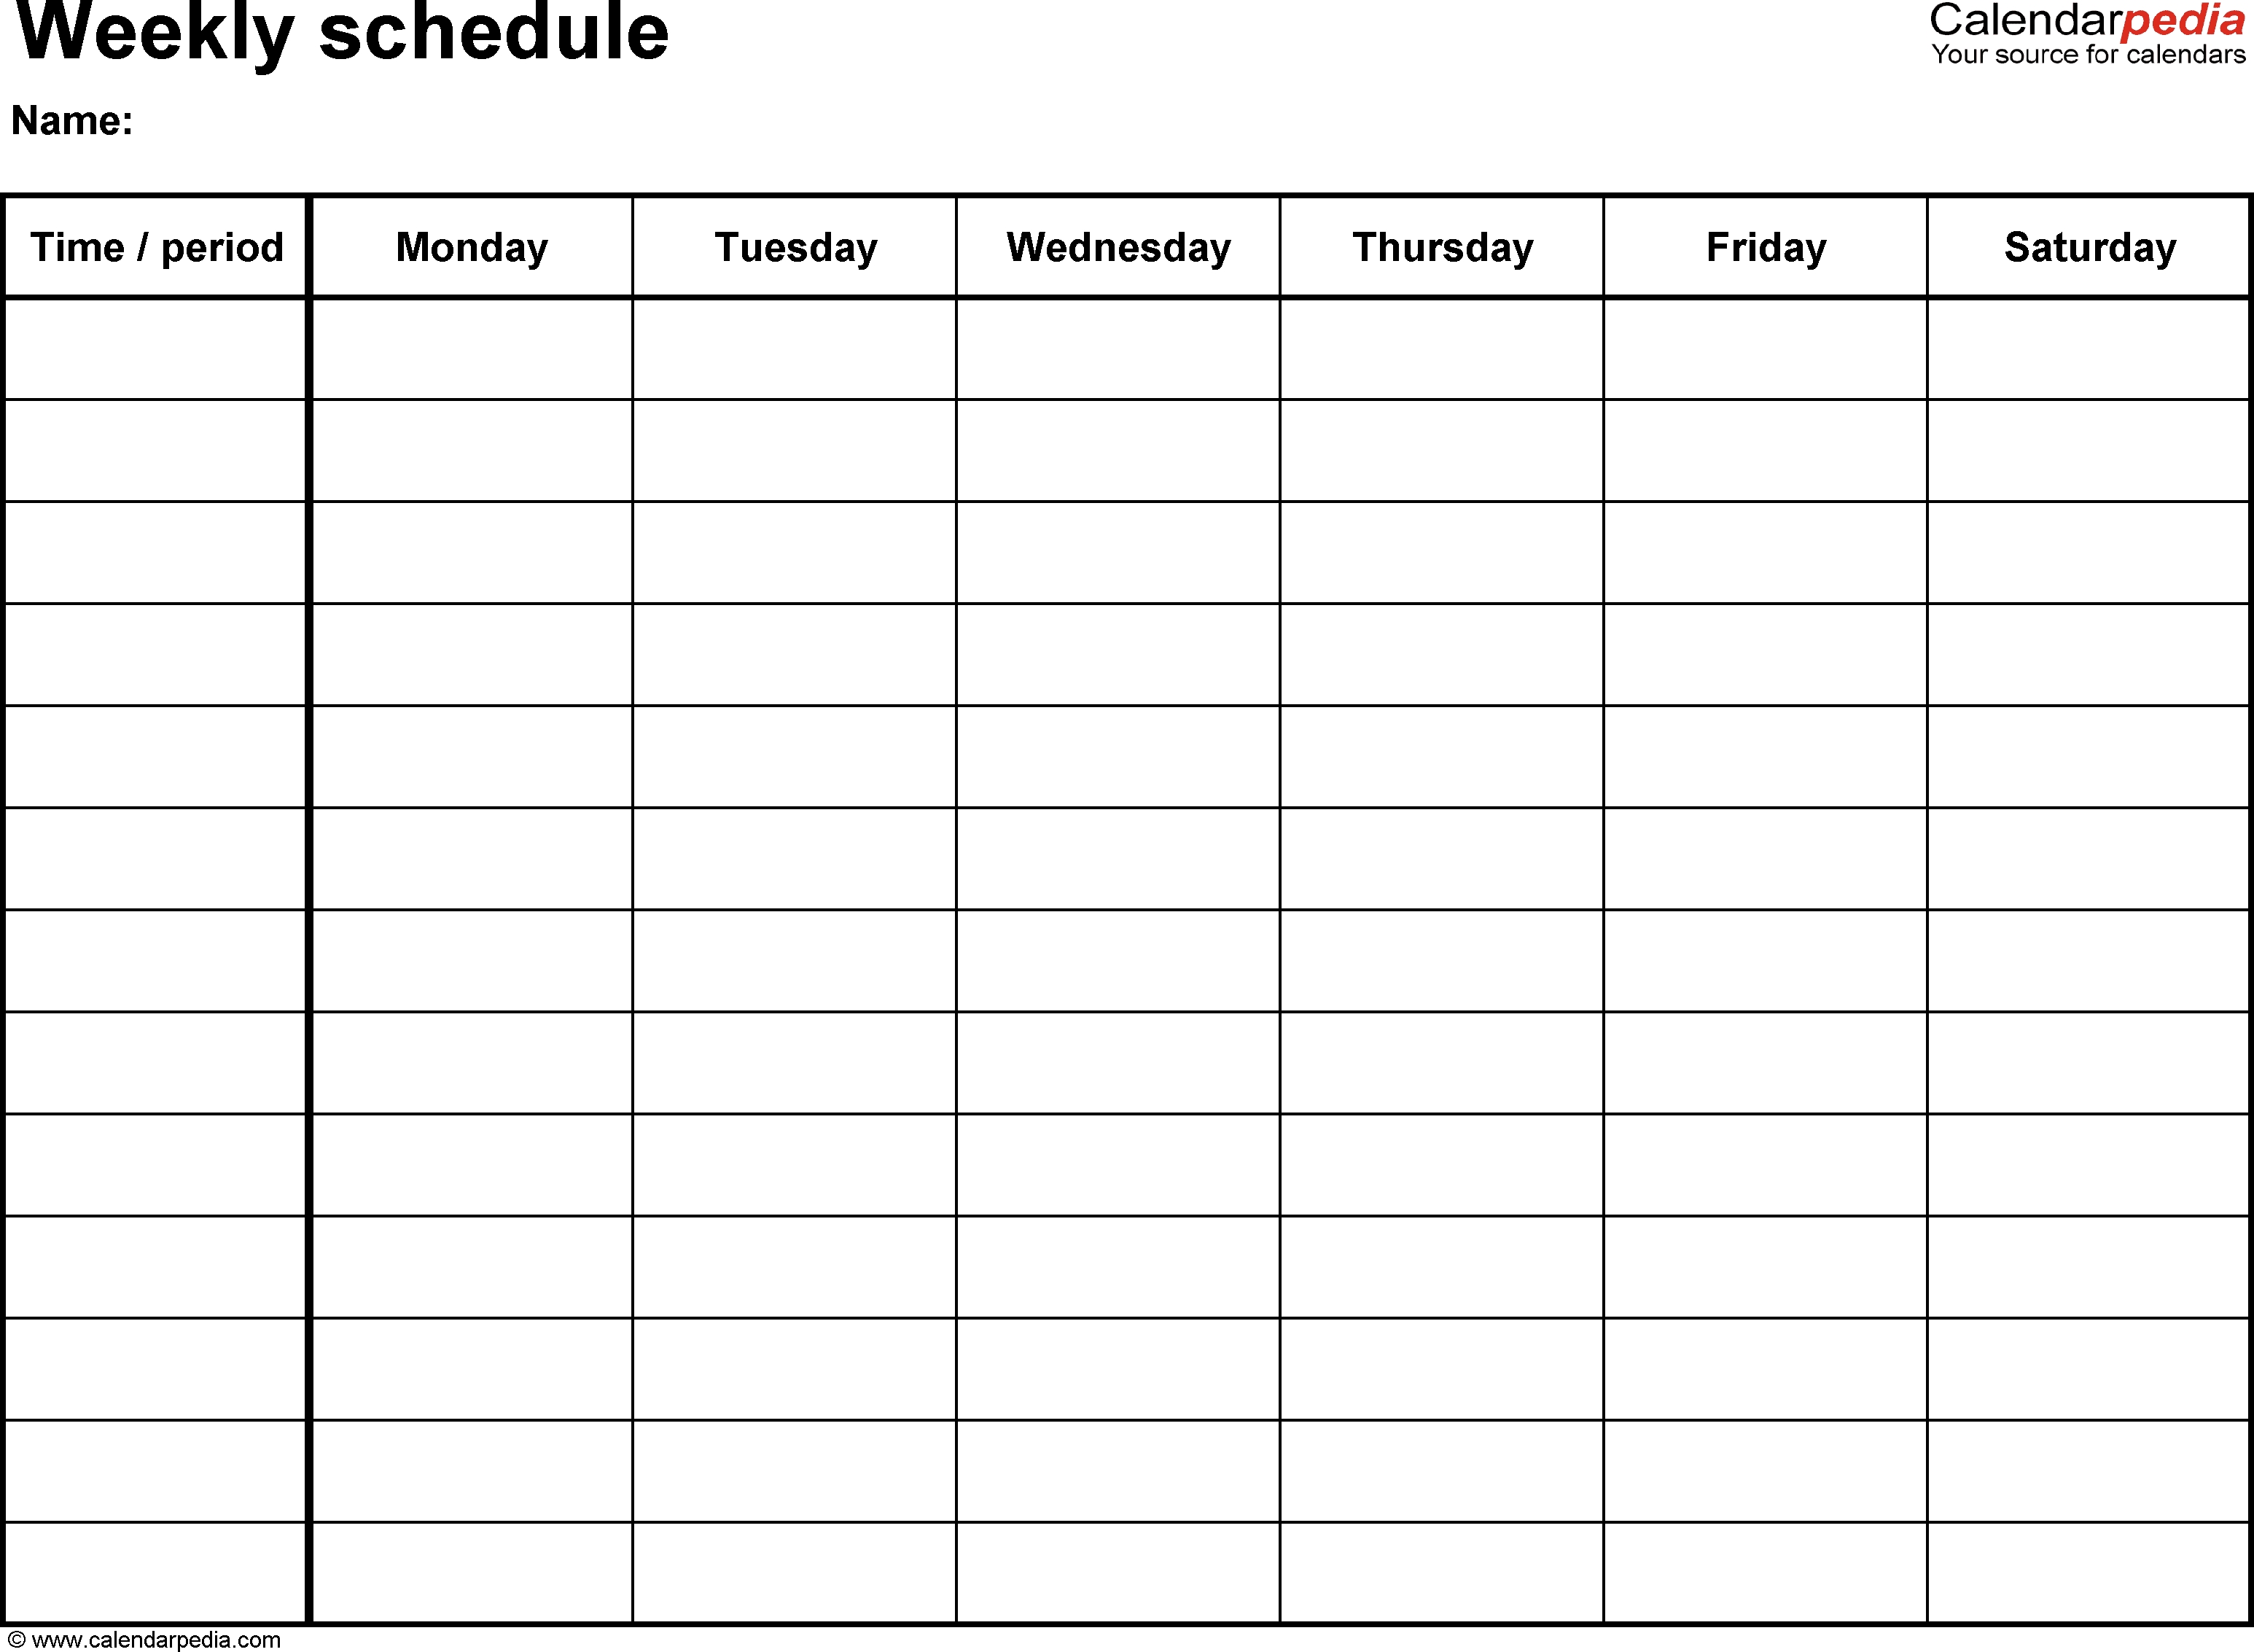 Free Weekly Schedule Templates For Pdf - 18 Templates-Printable Monthly Calendar Sunday To Saturday No Dates